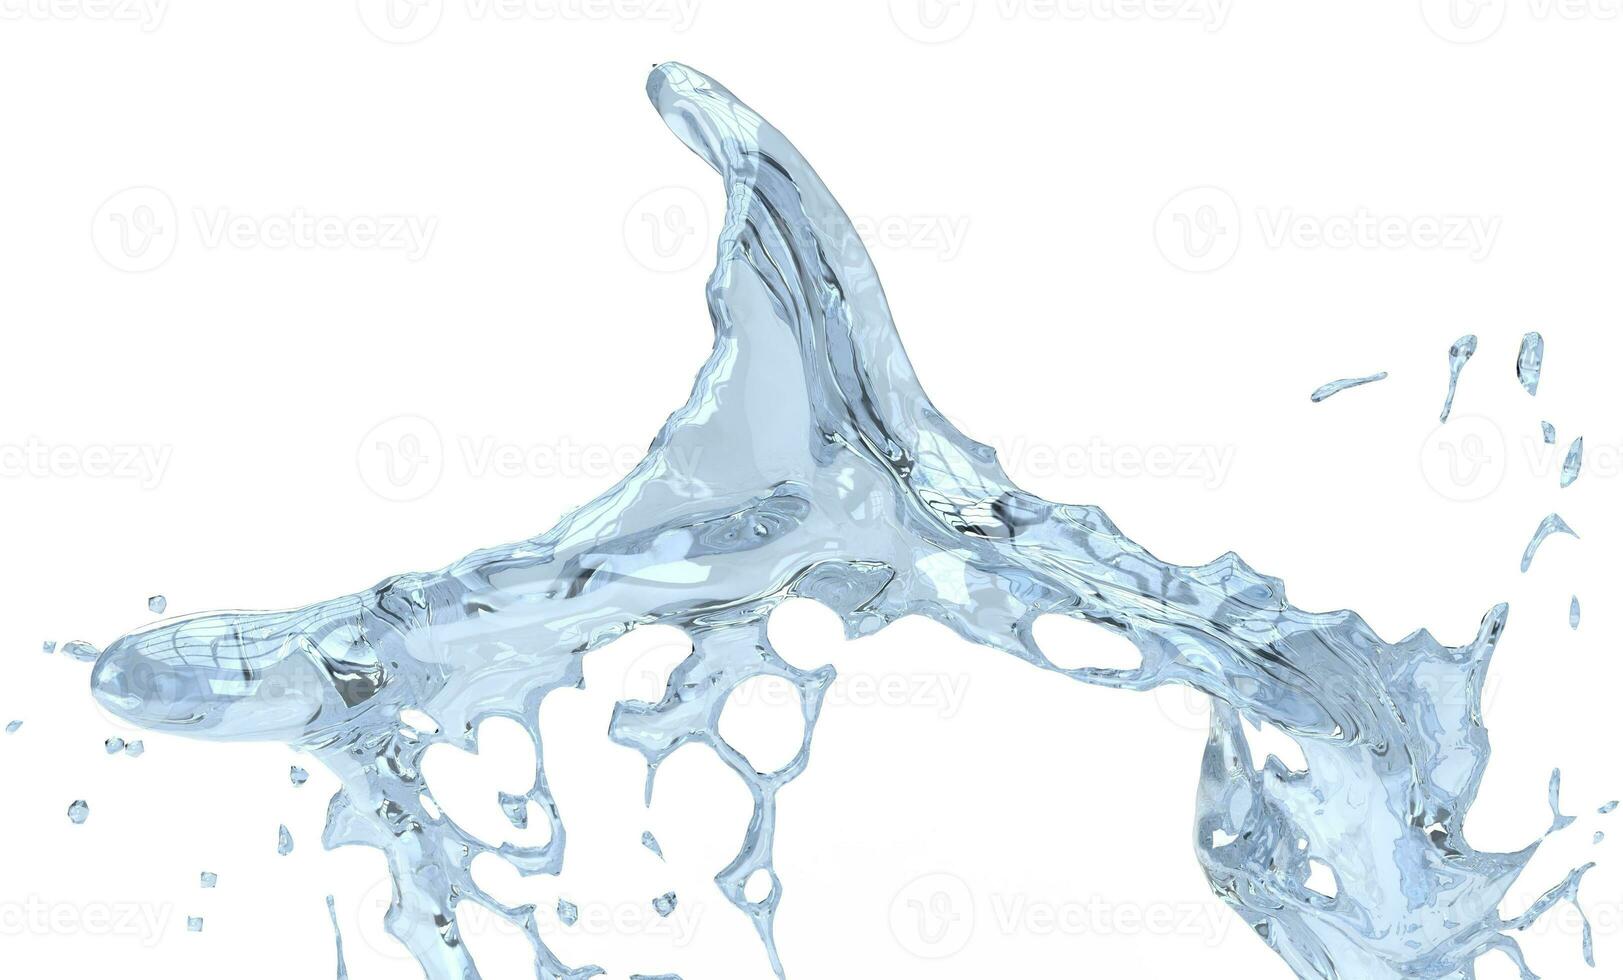 Beaytiful clear tiny water wave photo